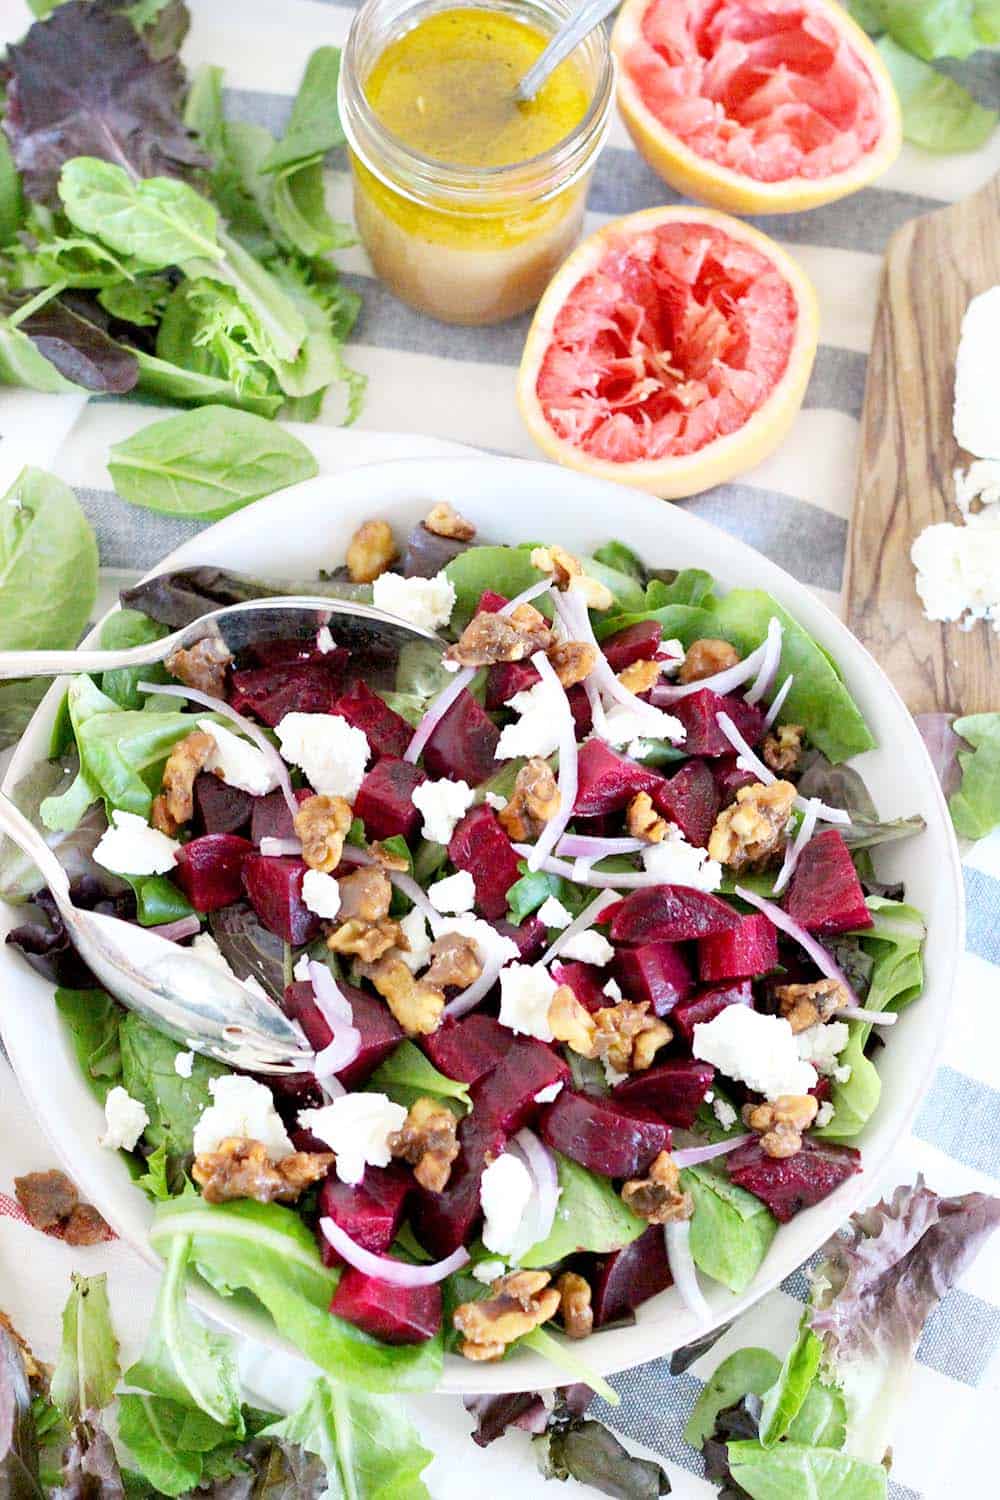 This healthy Roasted Beet Salad with Grapefruit Vinaigrette is the perfect thing to enjoy year round or as a colorful side for the holidays. Packed with goat cheese and candied walnuts, the ingredients combine to make the most perfect salad combination EVER! | www.bowlofdelicious.com